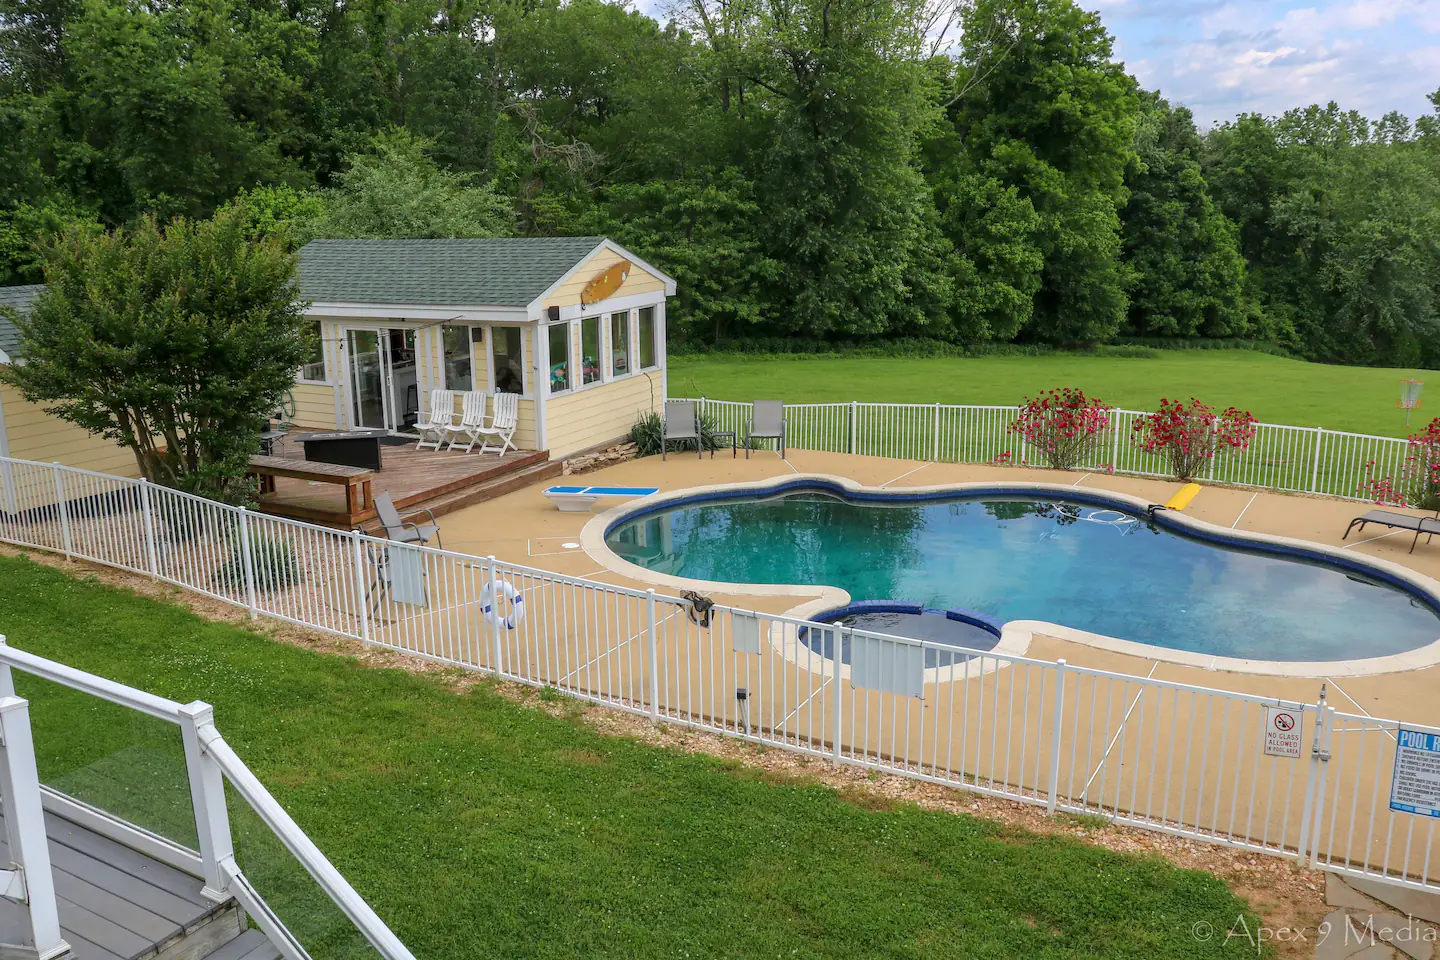 The private connected pool and pool house enable visitors to relax while taking in the beautiful river views.